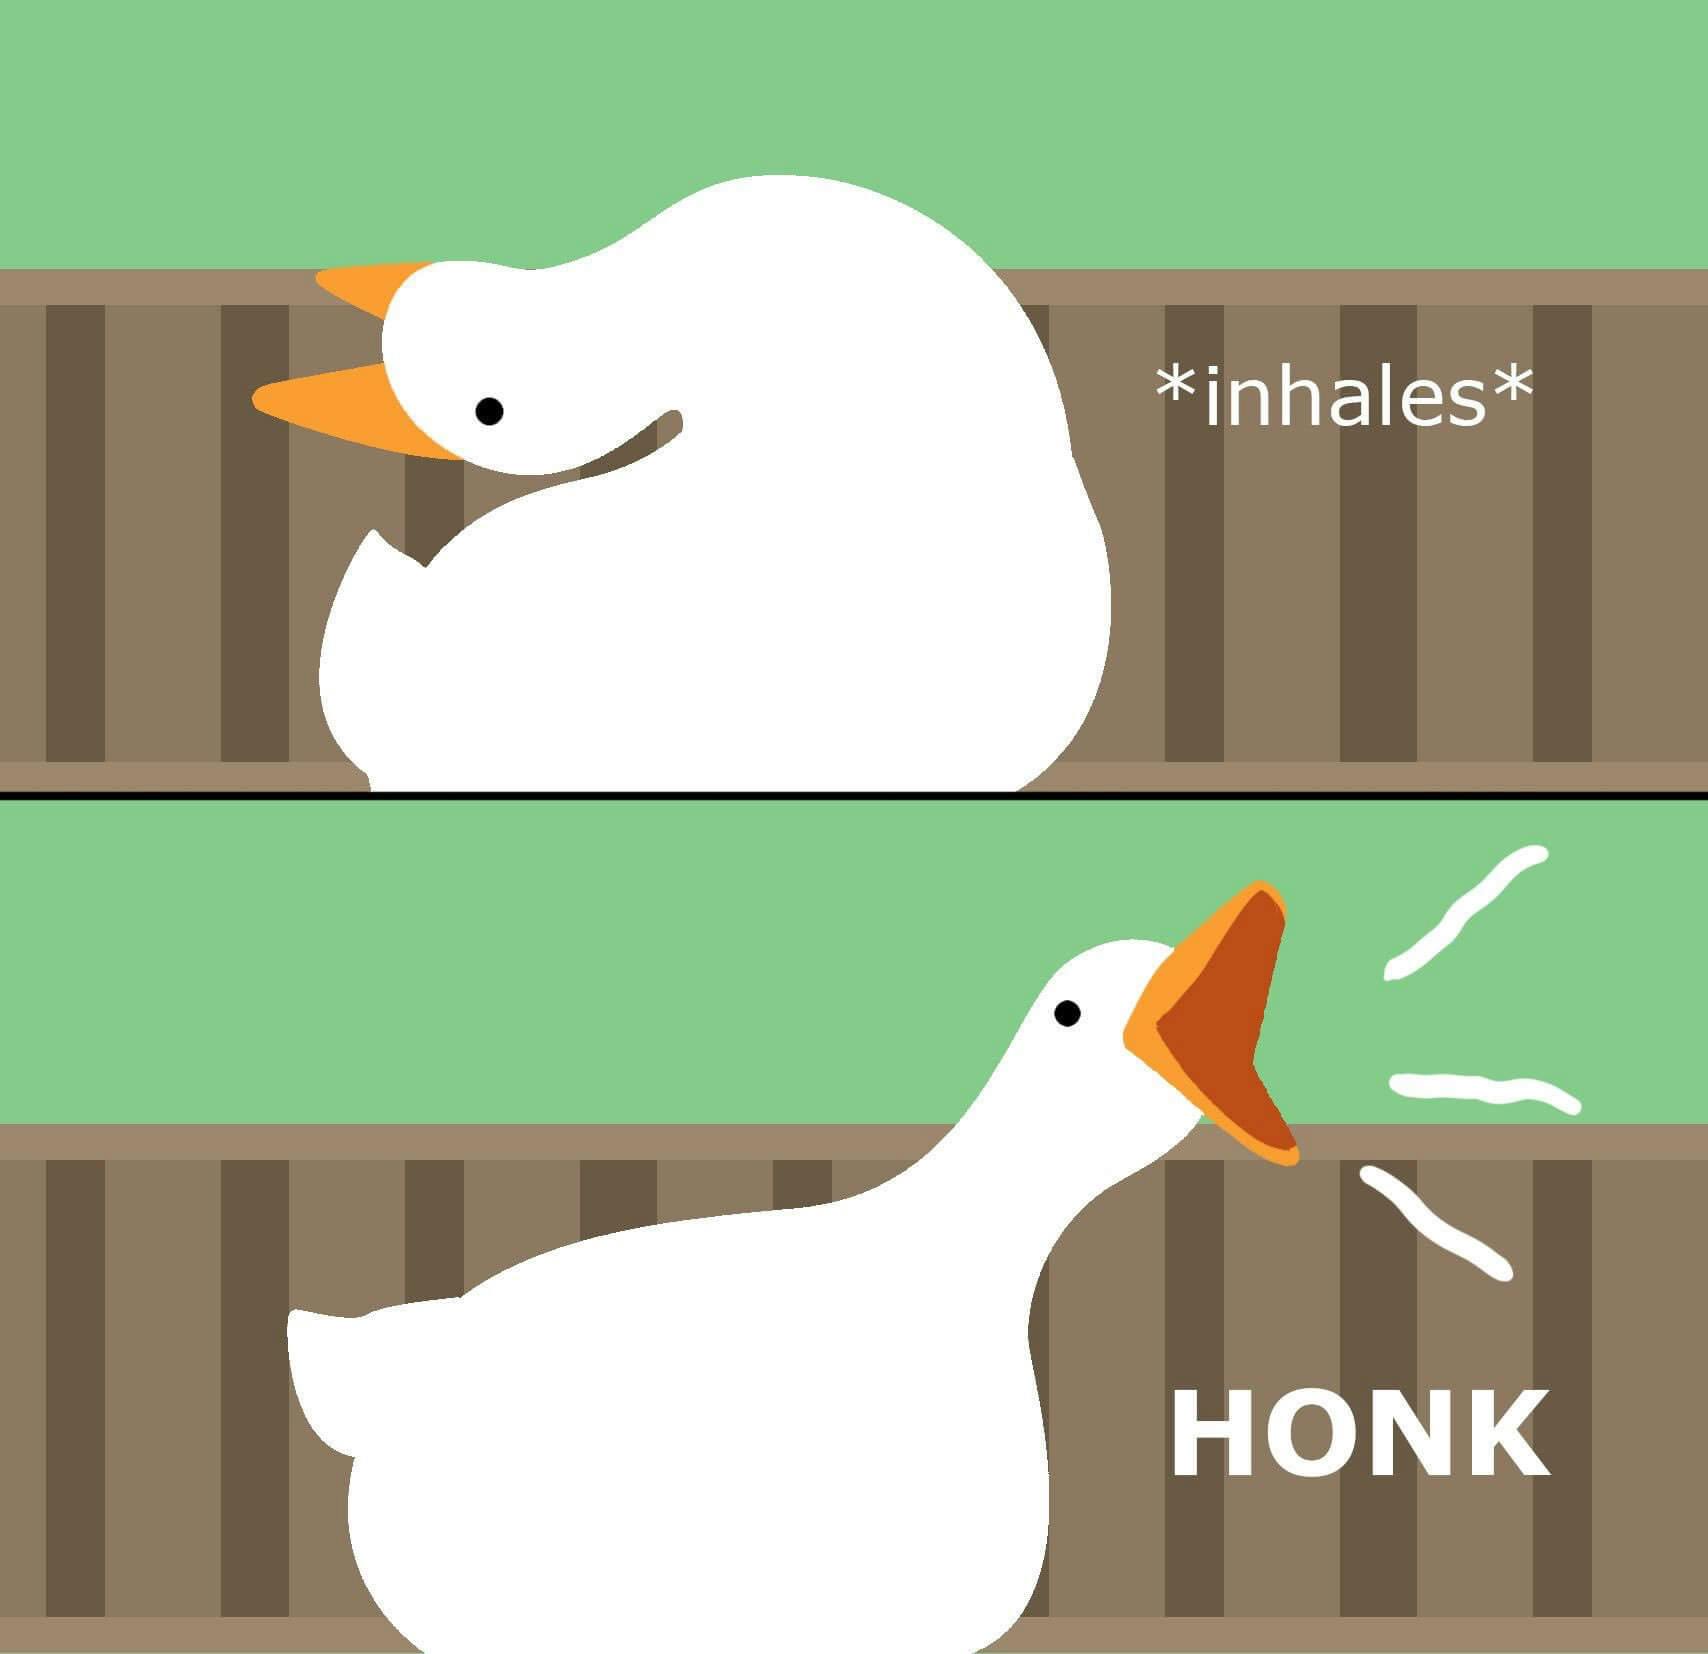 Untitled Goose Game meme showing the meme reaching its neck back before honking.